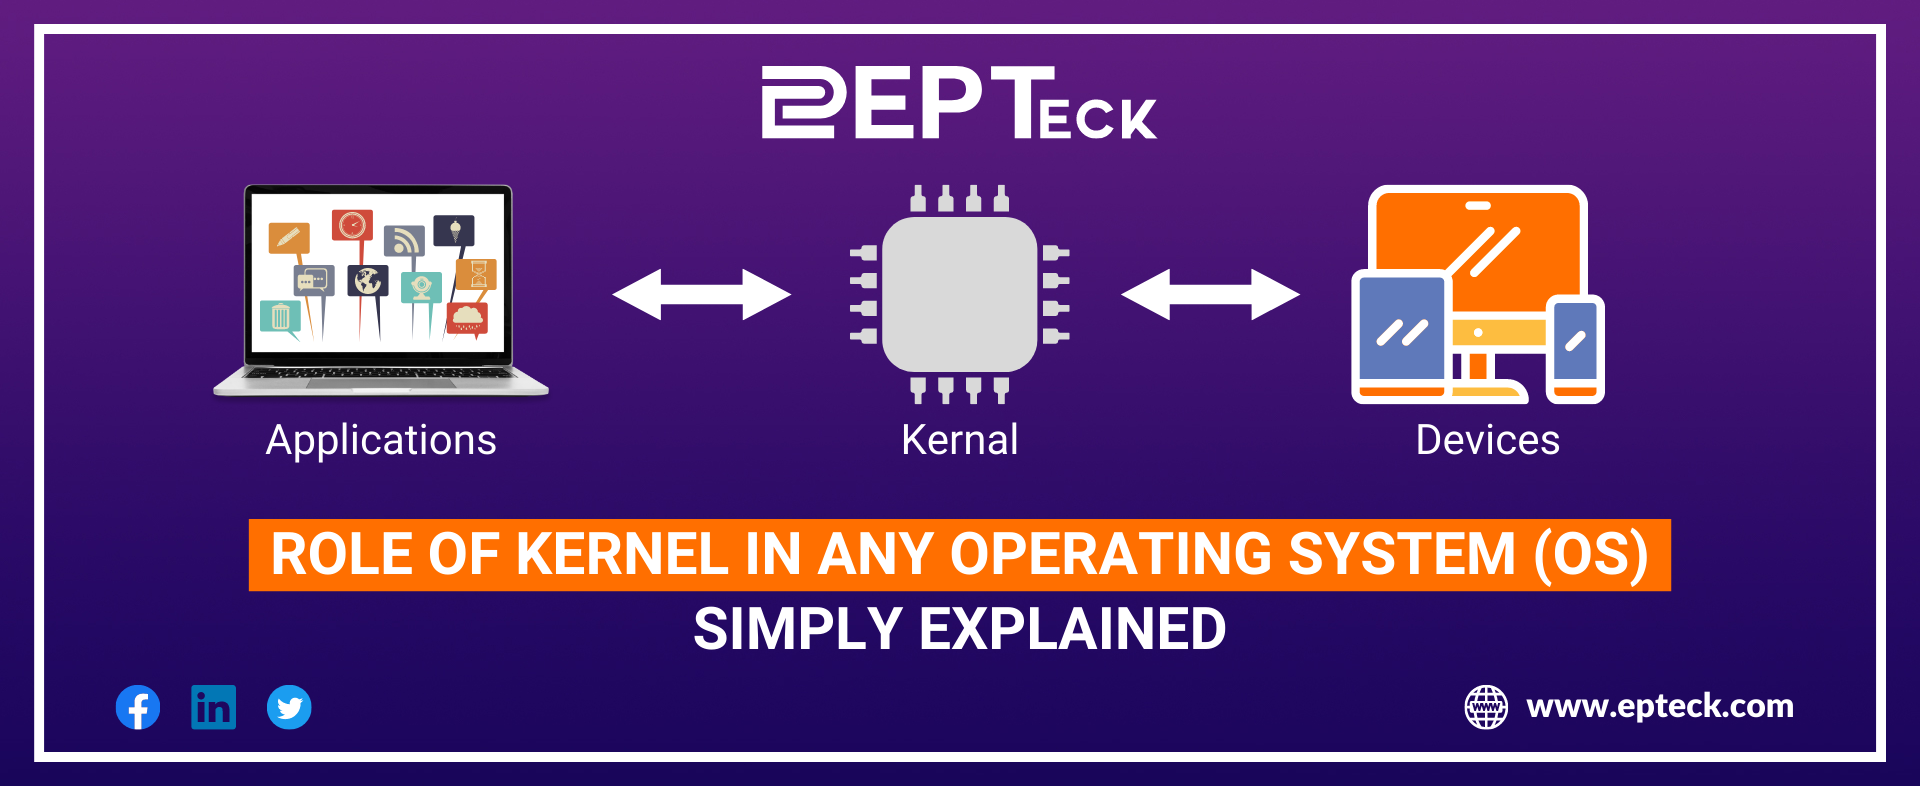 Kernel in Operating System